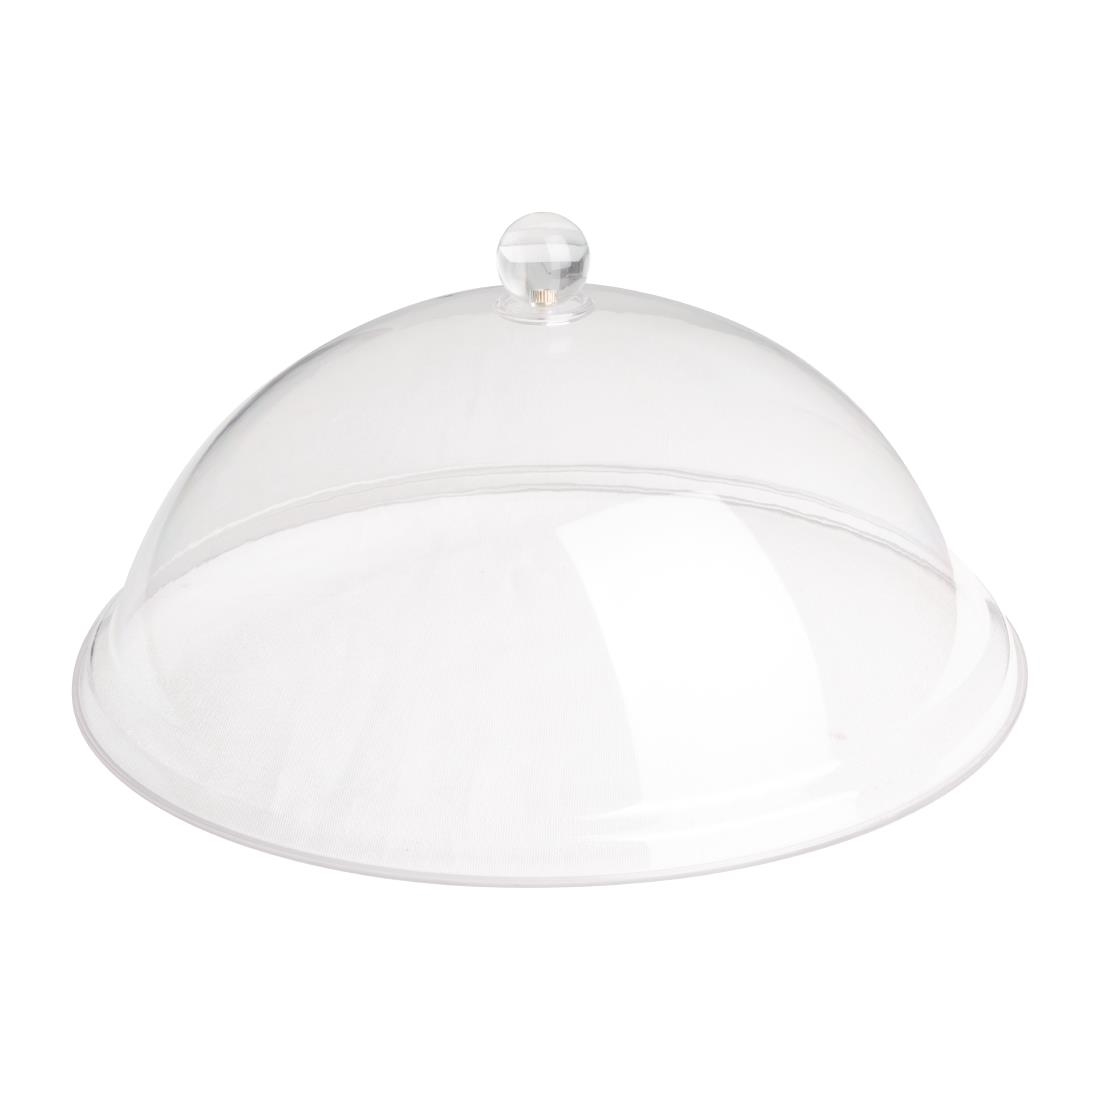 Olympia Kristallon Polycarbonate Domed Cover Clear 315(Ø) x 125(H)mm